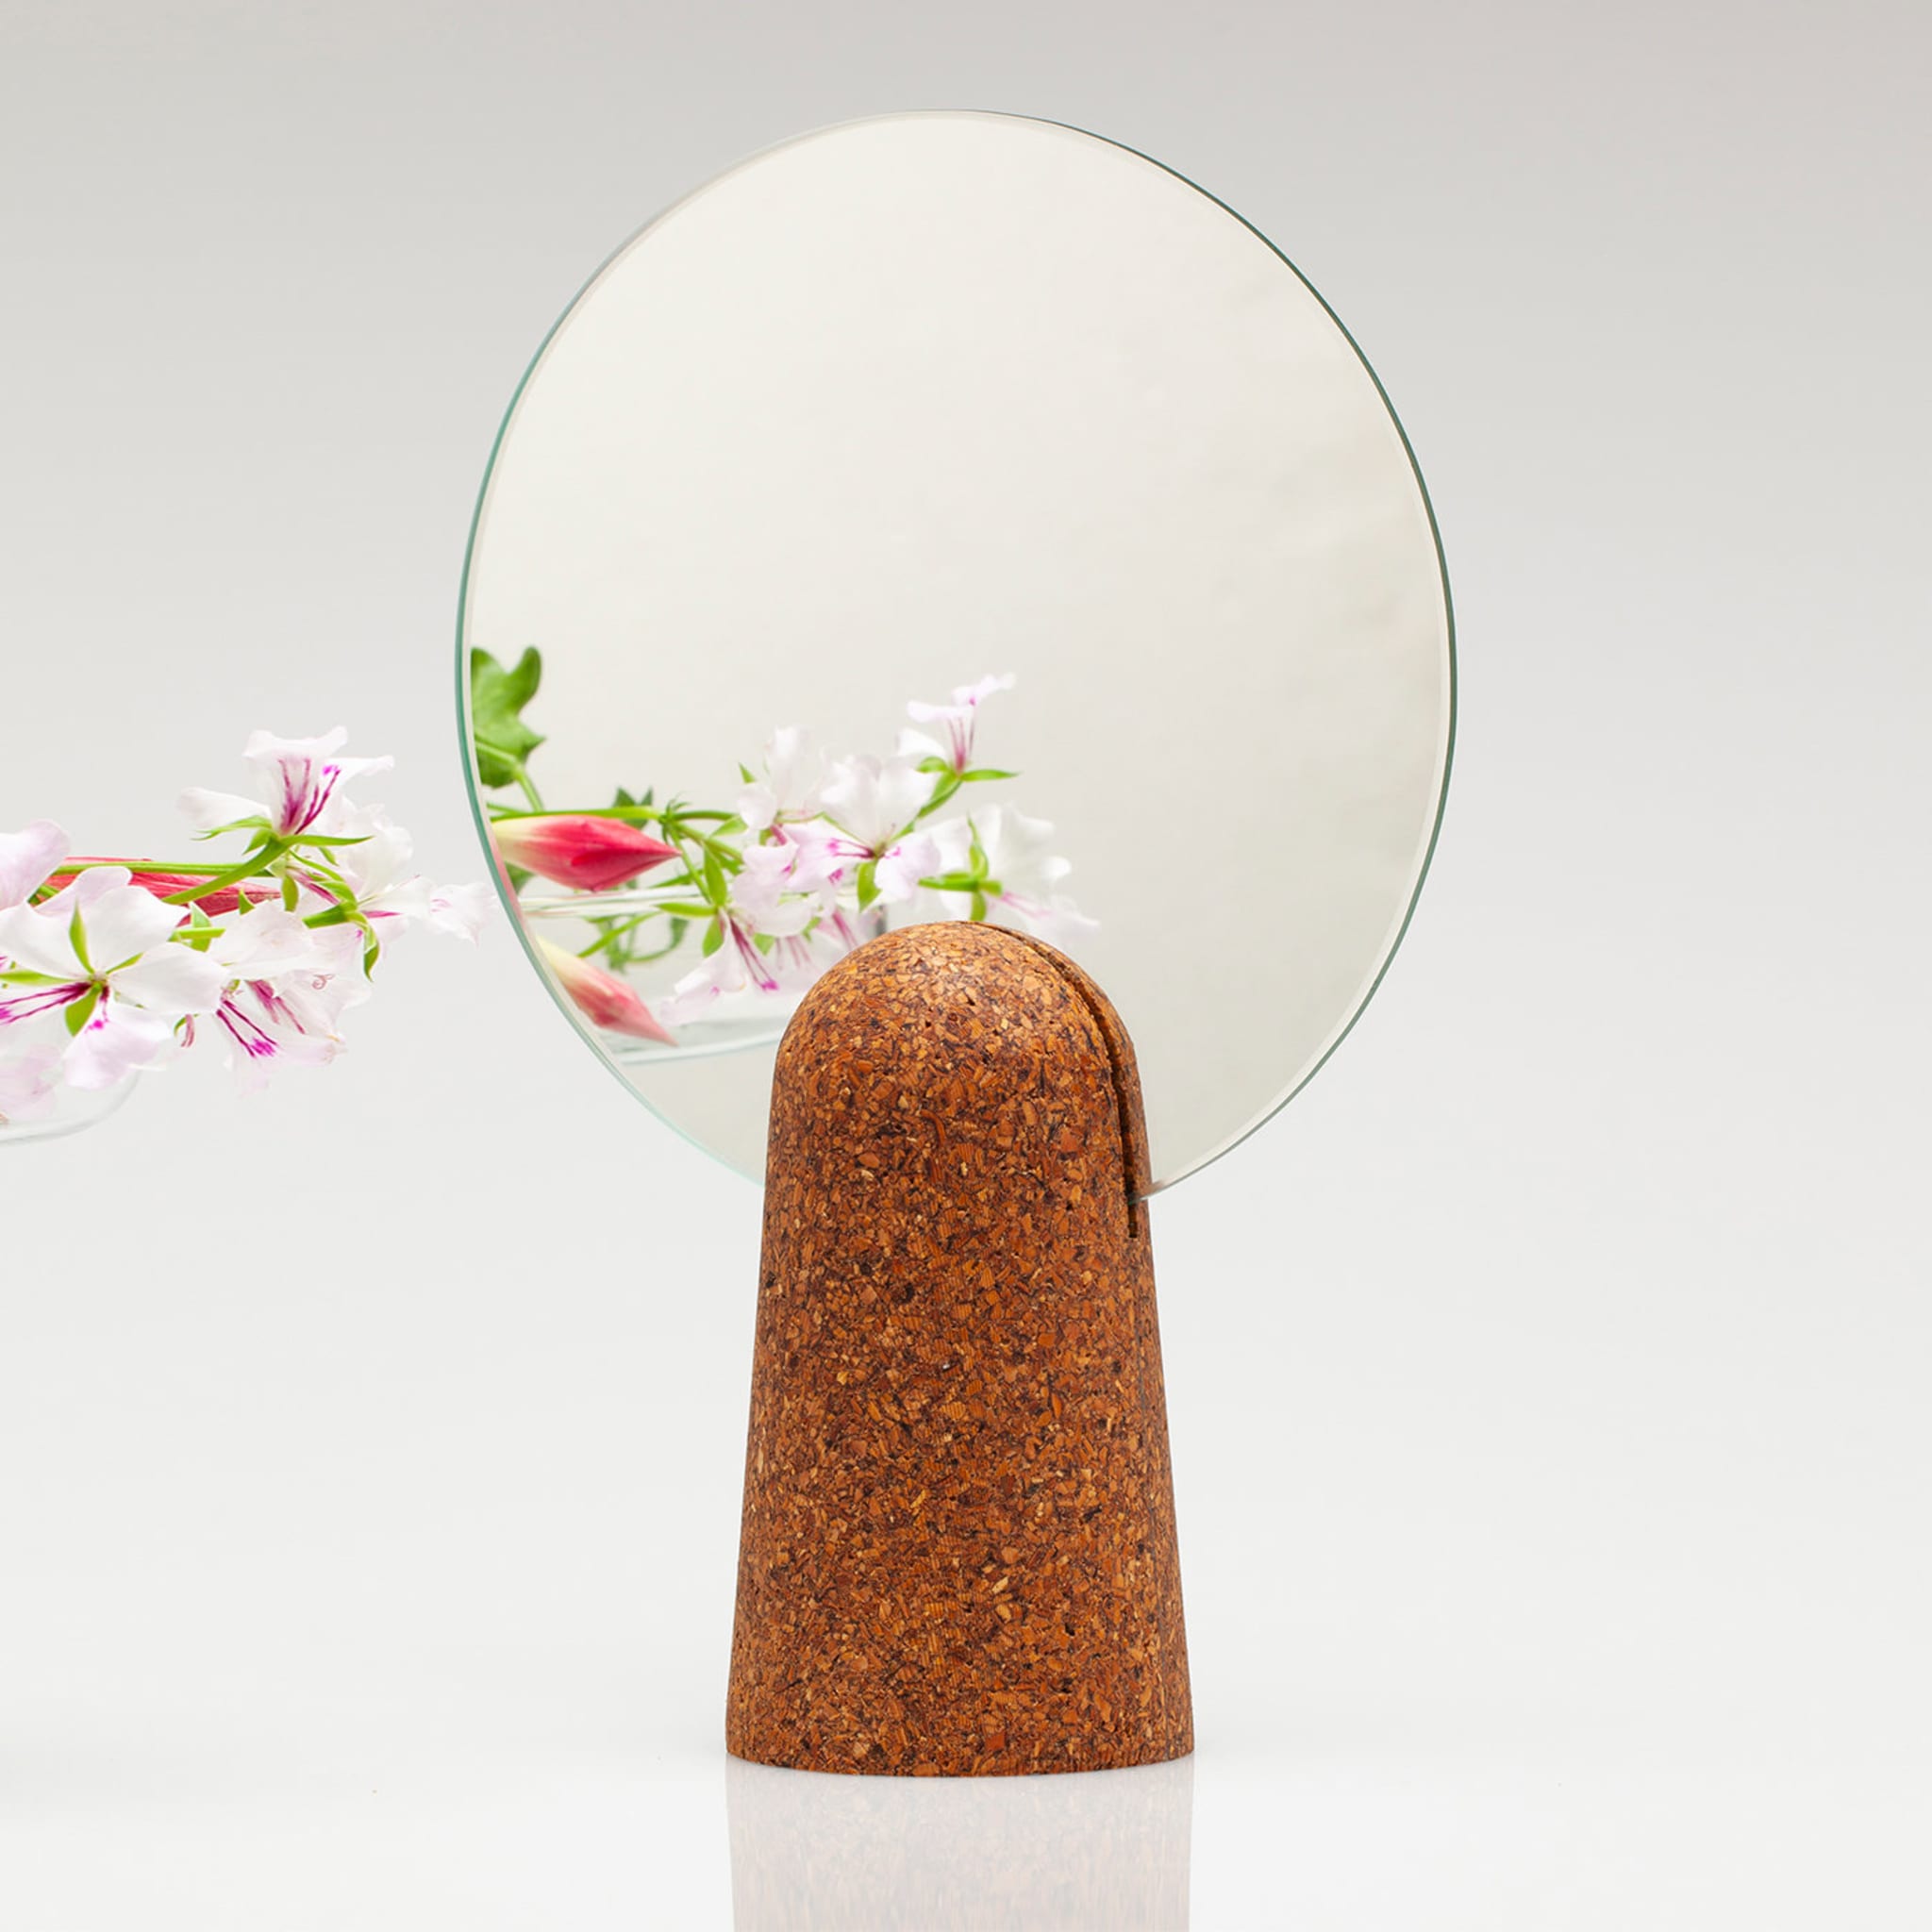 Almond Table Mirror by Dudesign - Alternative view 1